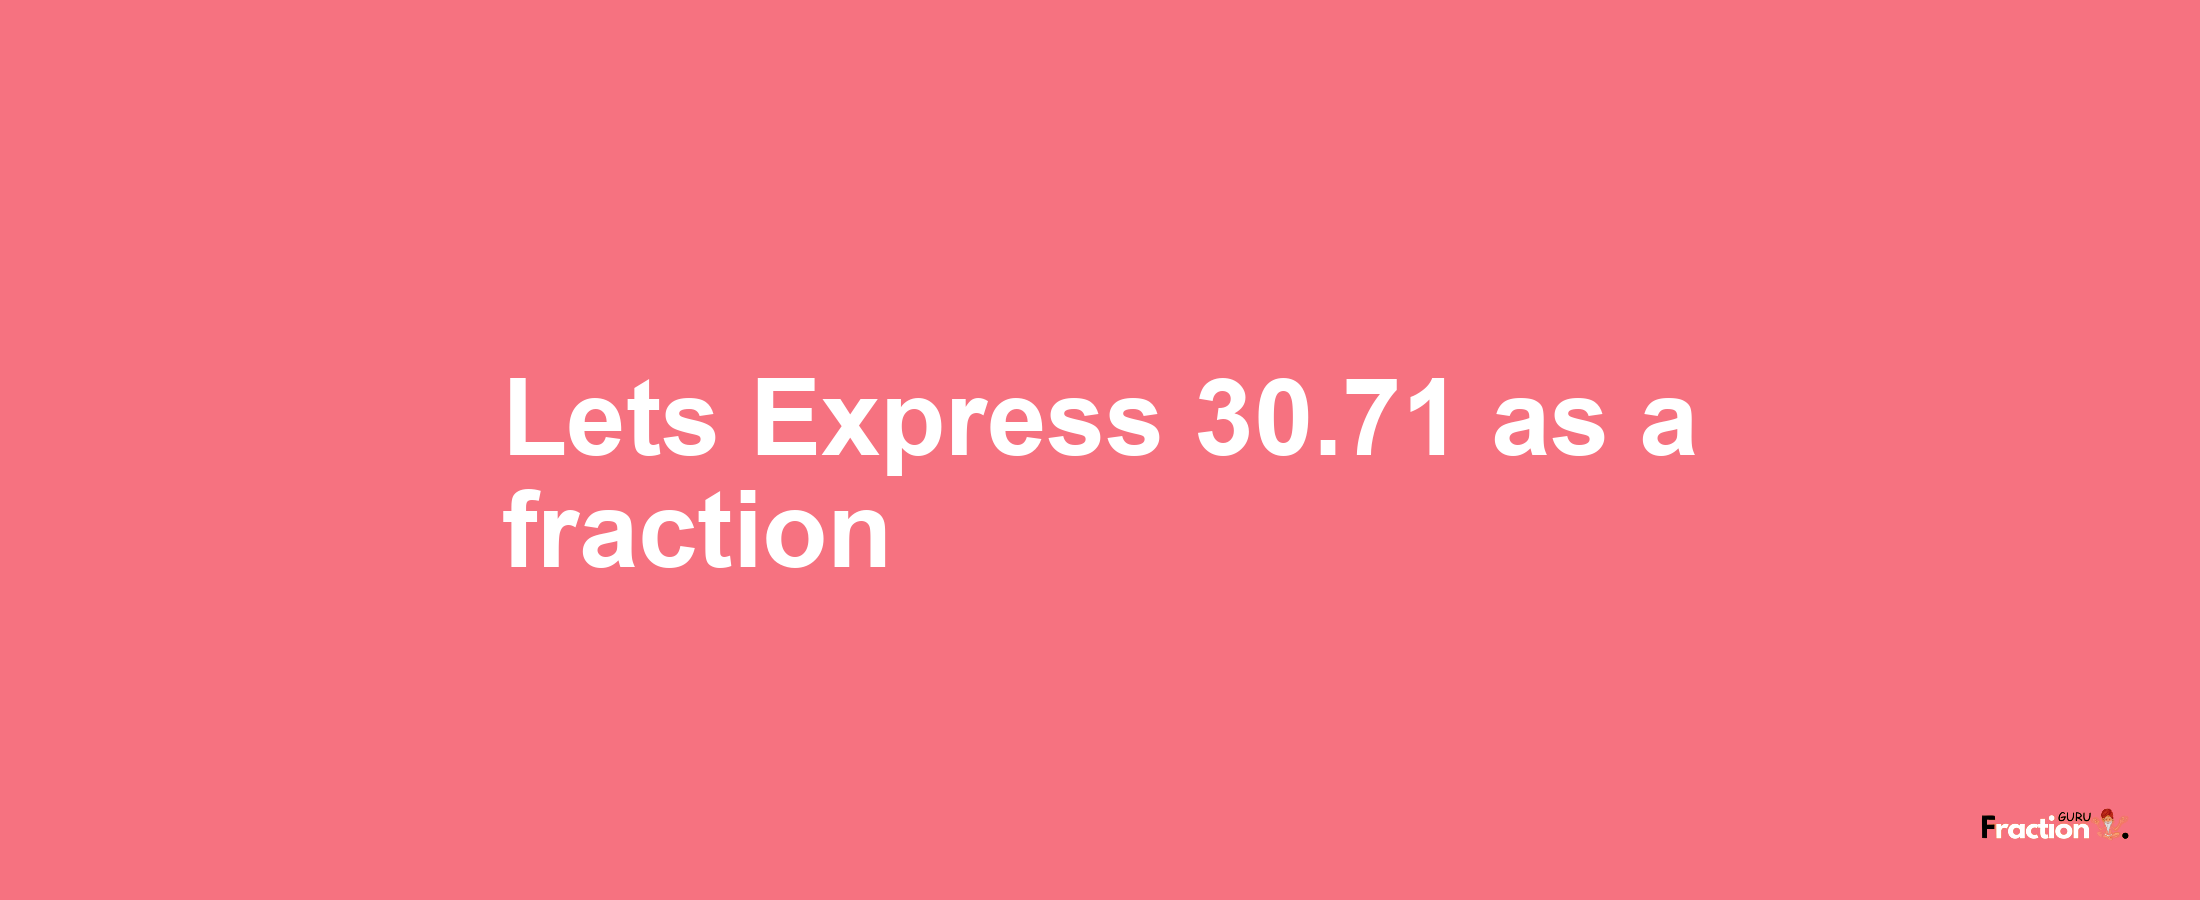 Lets Express 30.71 as afraction